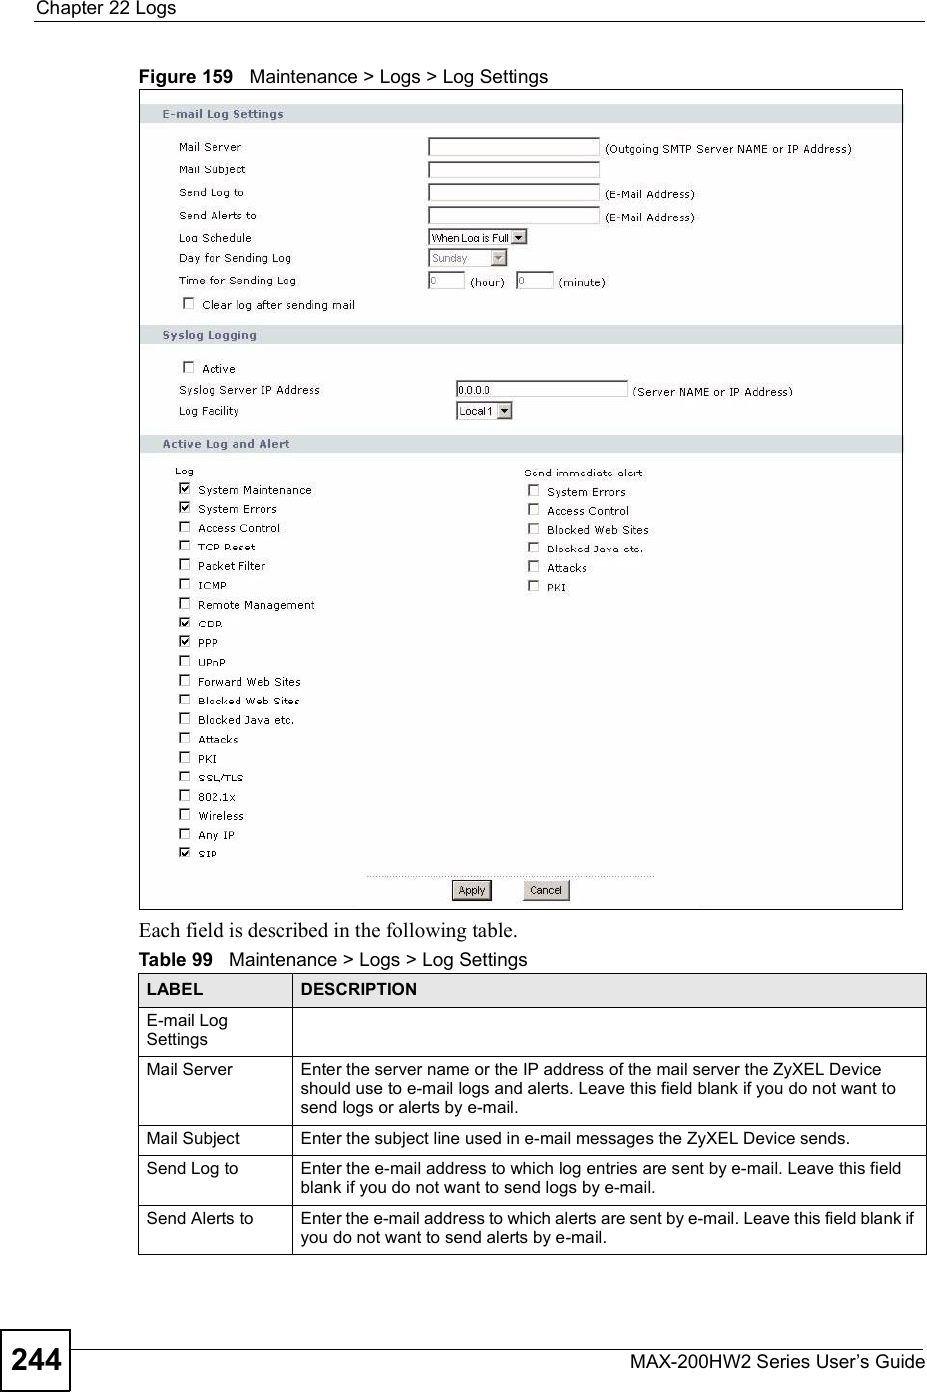 Chapter 22LogsMAX-200HW2 Series User s Guide244Figure 159   Maintenance &gt; Logs &gt; Log SettingsEach field is described in the following table.Table 99   Maintenance &gt; Logs &gt; Log SettingsLABEL DESCRIPTIONE-mail Log SettingsMail Server Enter the server name or the IP address of the mail server the ZyXEL Device should use to e-mail logs and alerts. Leave this field blank if you do not want to send logs or alerts by e-mail.Mail Subject Enter the subject line used in e-mail messages the ZyXEL Device sends.Send Log to Enter the e-mail address to which log entries are sent by e-mail. Leave this field blank if you do not want to send logs by e-mail.Send Alerts to Enter the e-mail address to which alerts are sent by e-mail. Leave this field blank if you do not want to send alerts by e-mail.